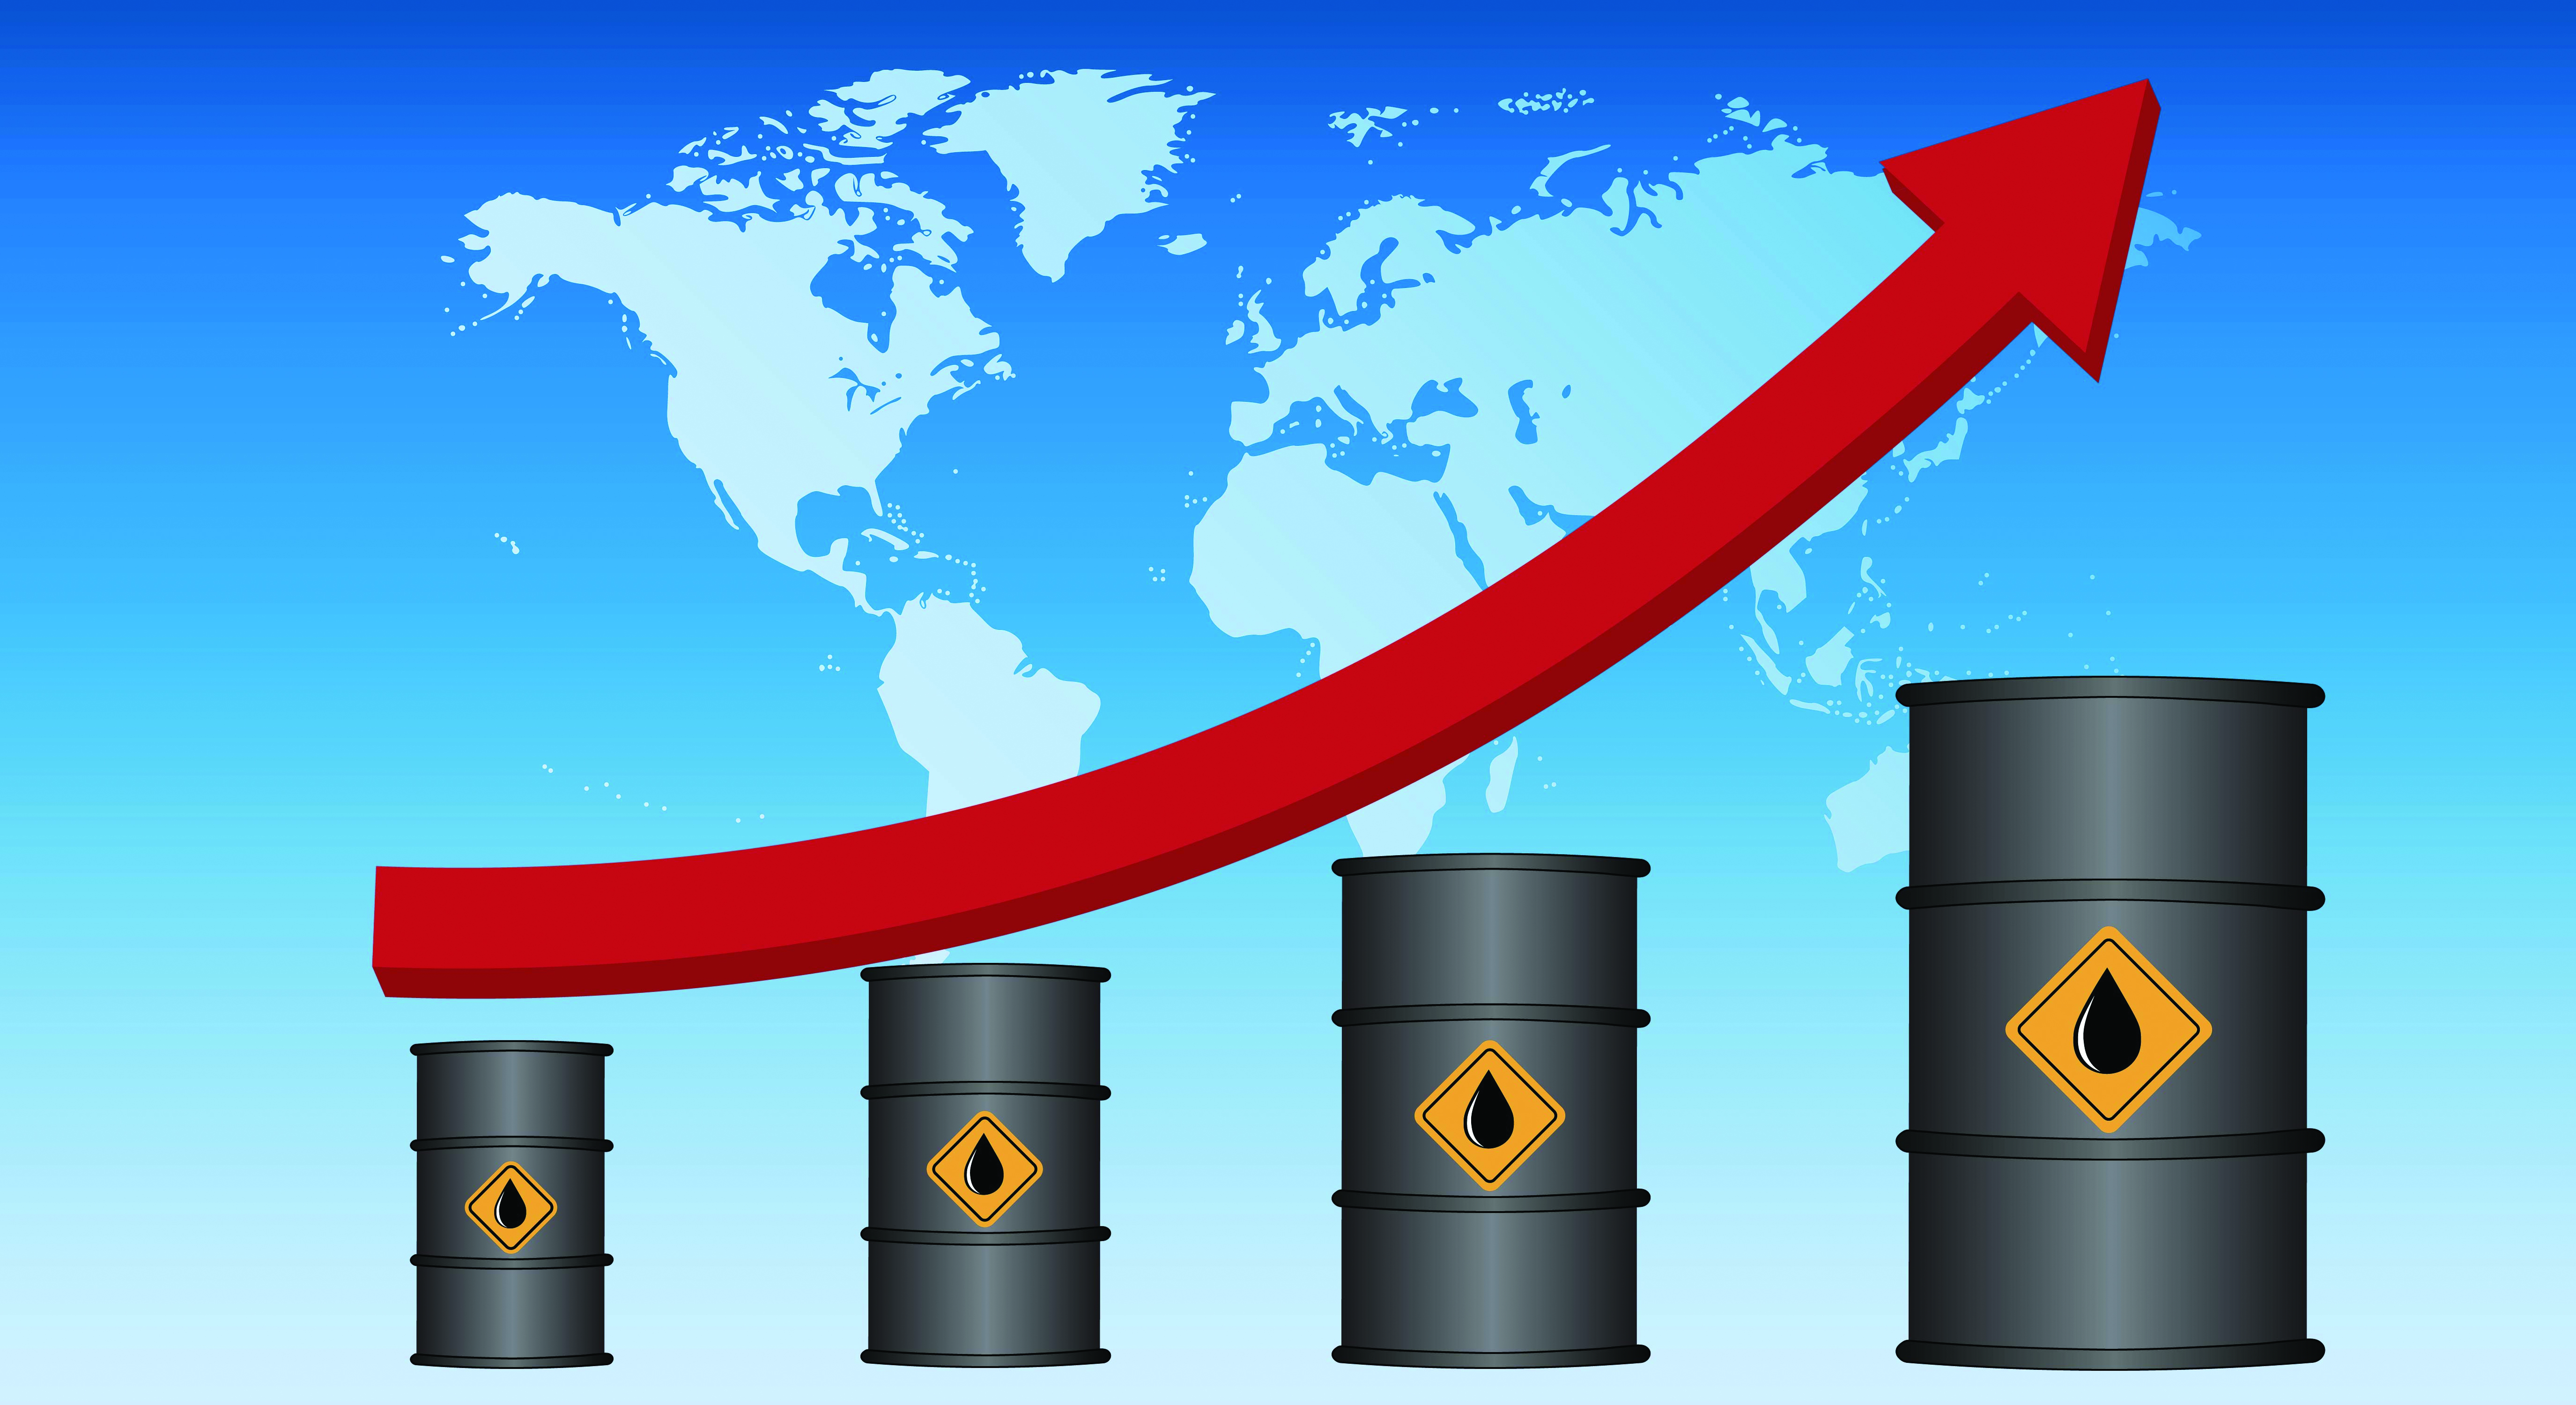 Blind Oar business U.S. Oil Production to Average 11.8 Million Barrels a Day | phcppros